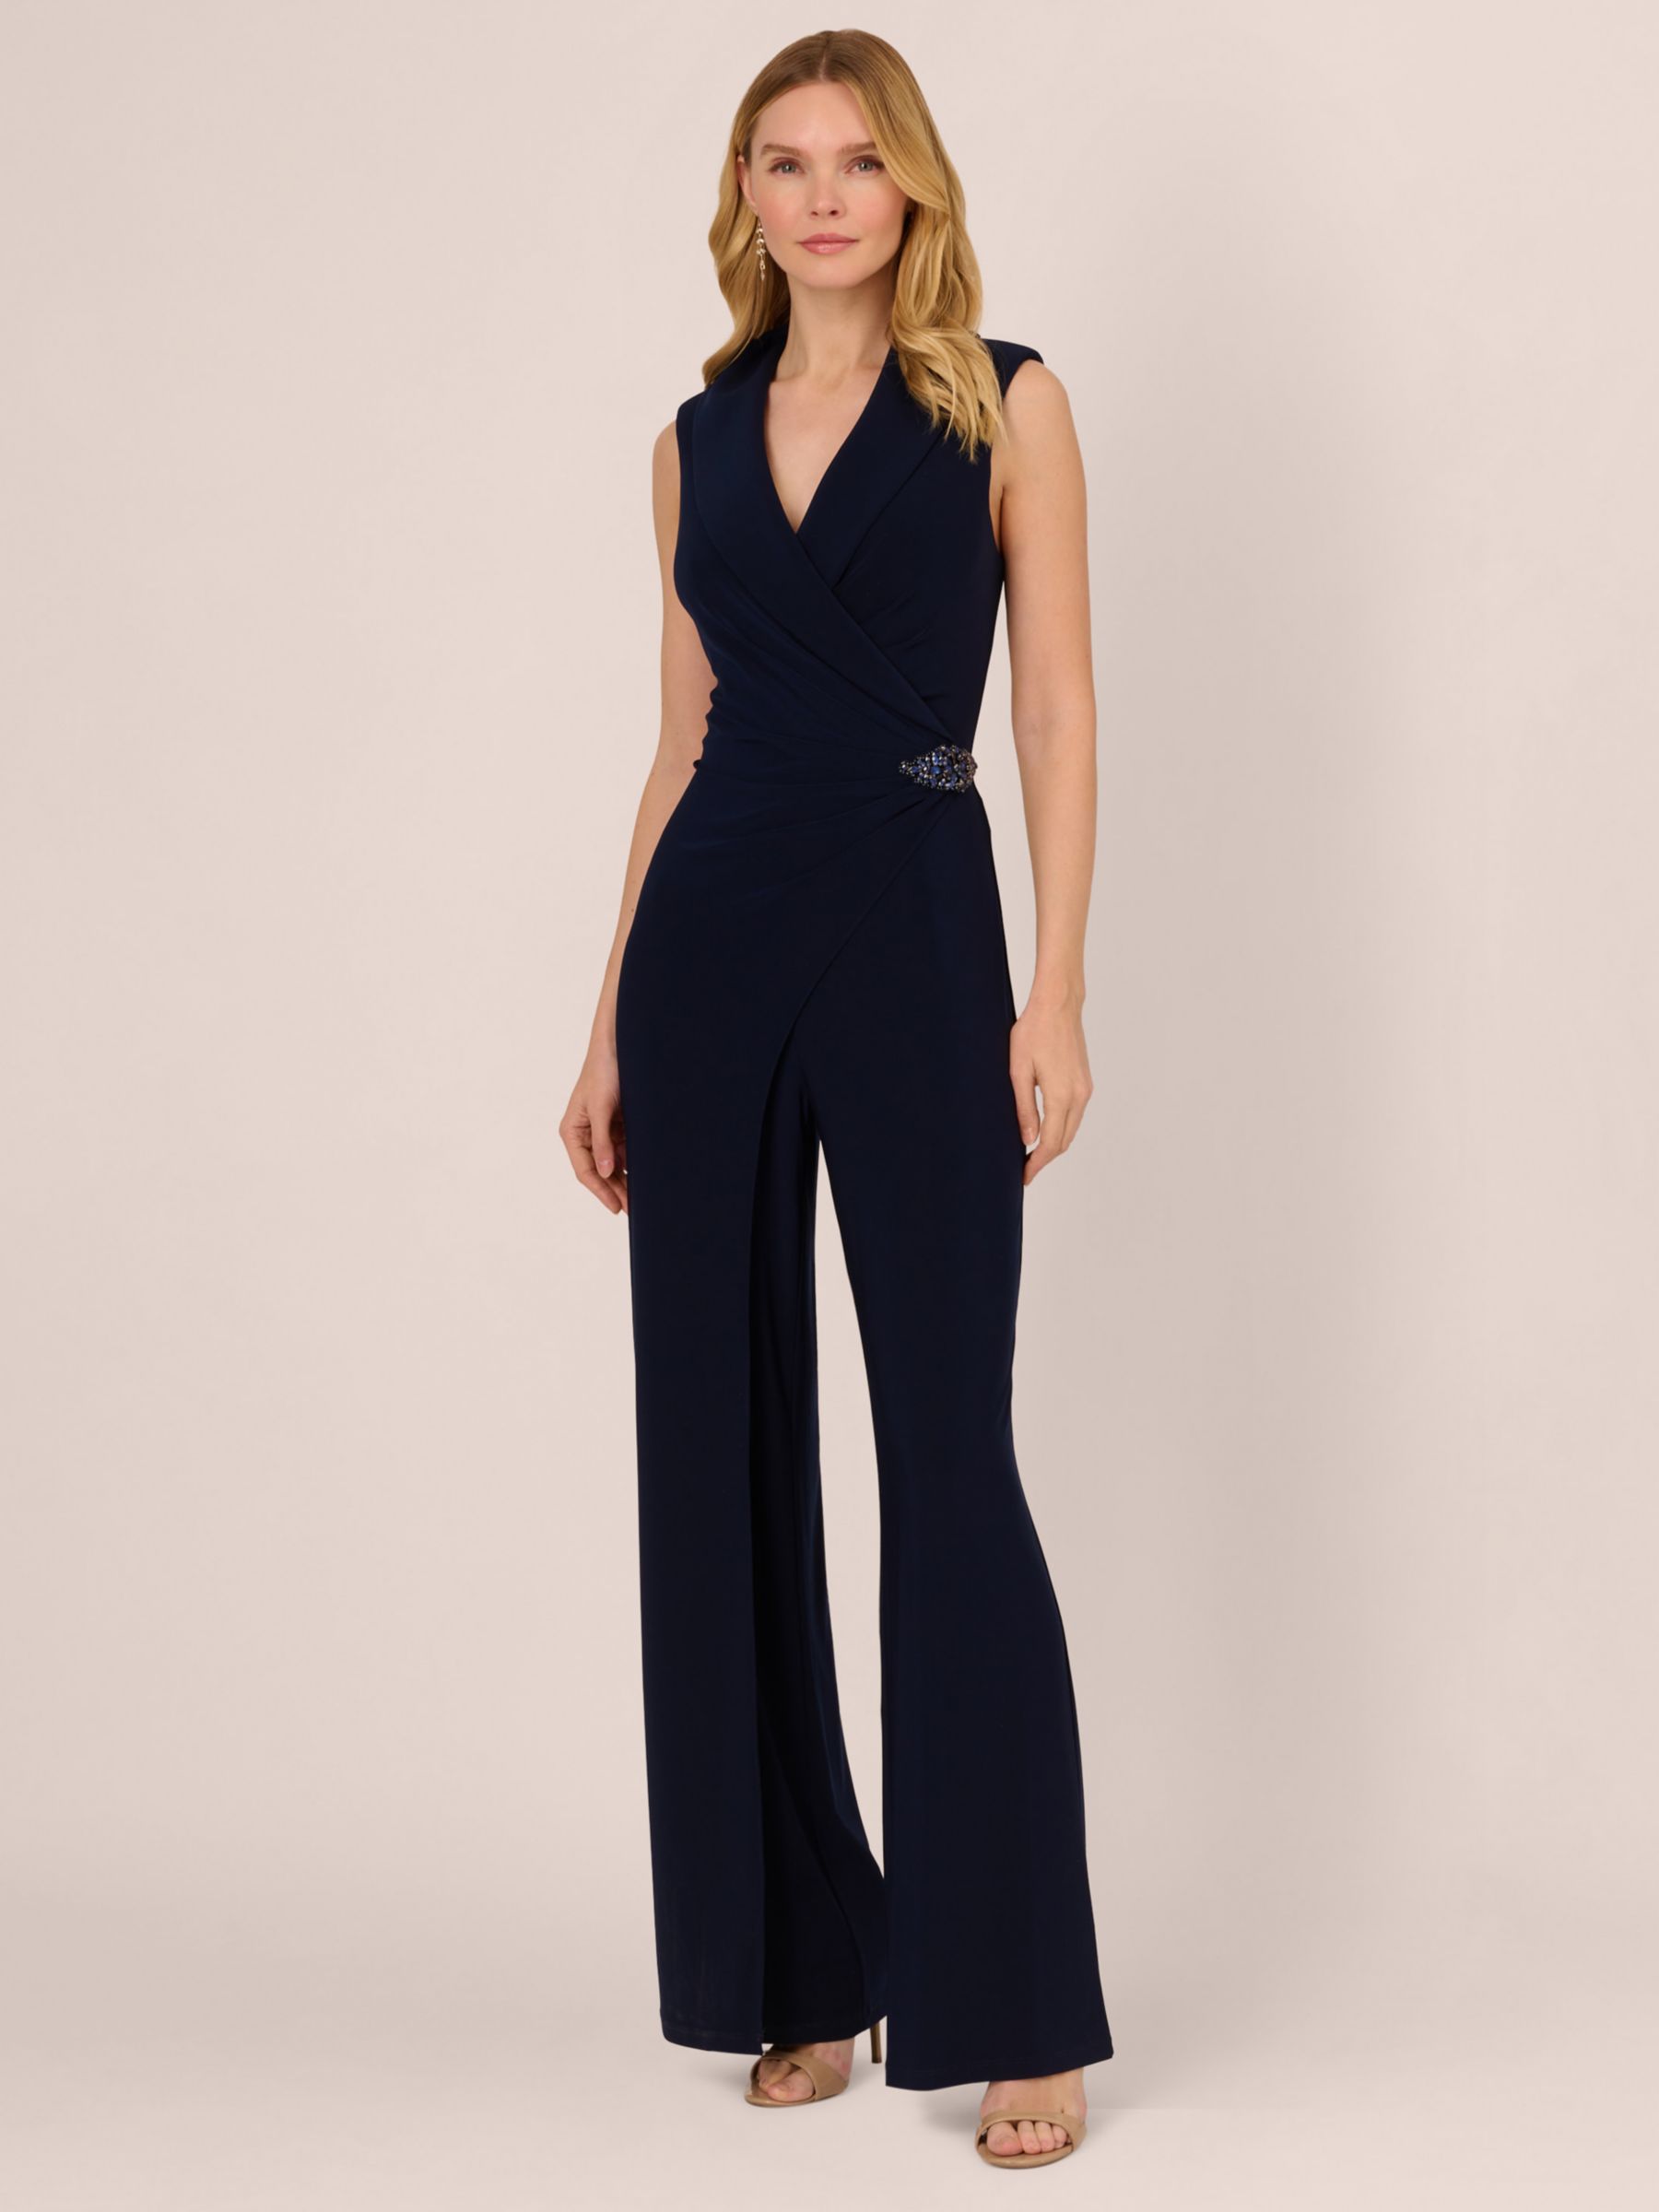 Adrianna Papell Metallic Crinkle Jumpsuit, Taupe/Pink at John Lewis &  Partners